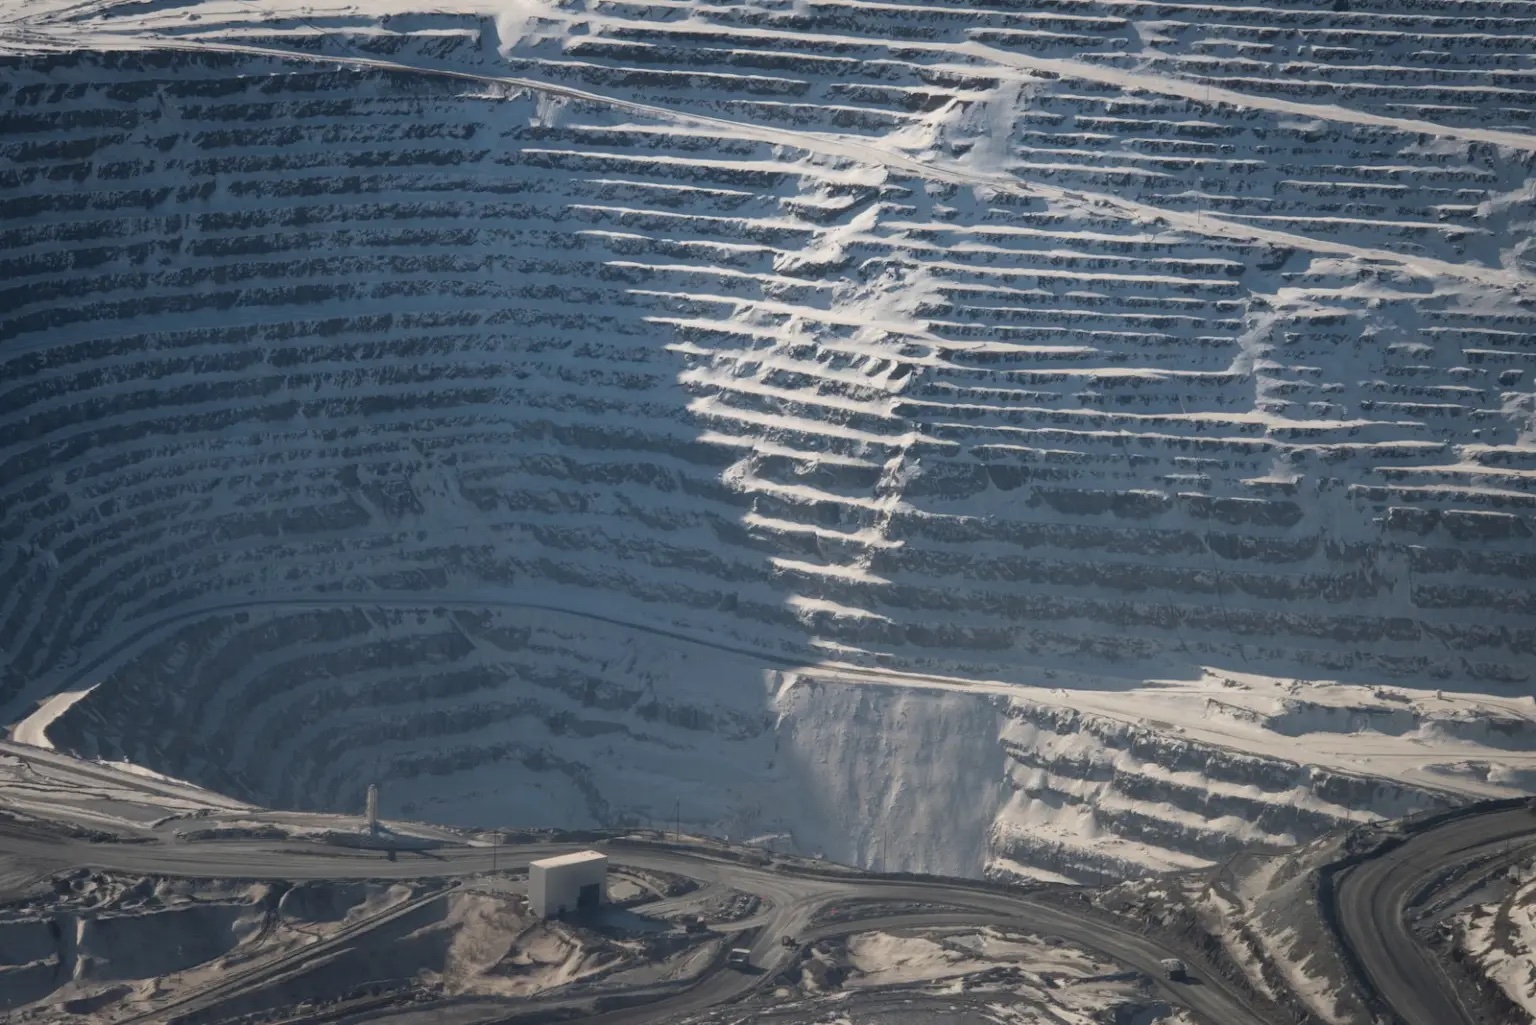 A huge mining quarry, powdered with snow.